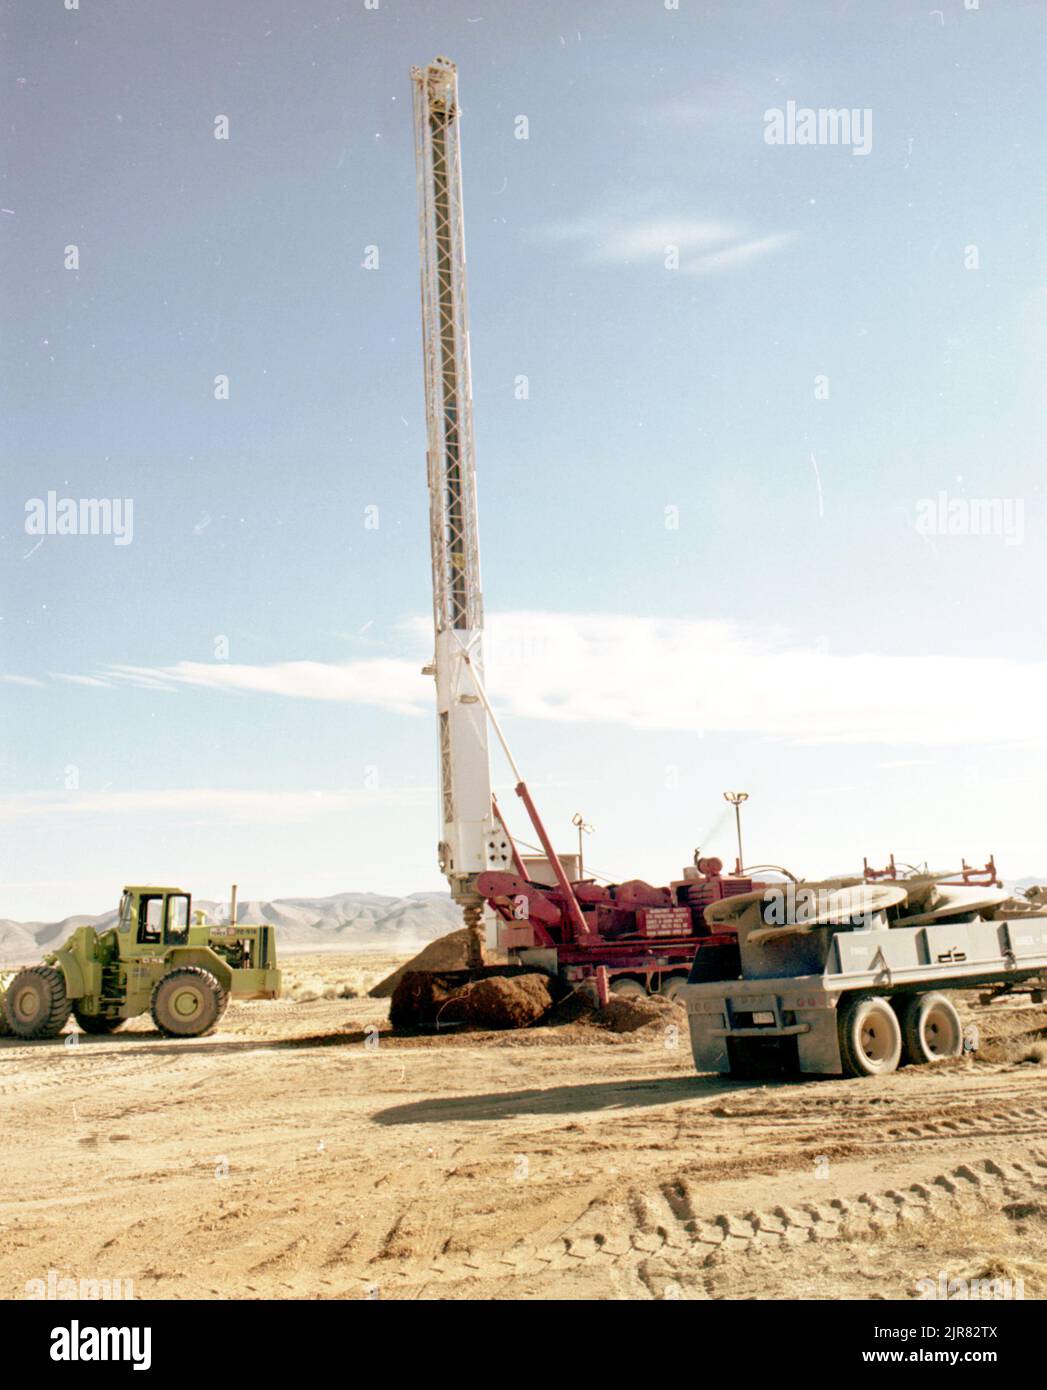 A810114 DRILL RIGS DRILL RIGS J. BARTLETT (Project Engineer) JAN 13 81 EG&G/NTS PHOTO LAB Publication Date: 1/13/1981  AUGER #2; BARTLETT, J.; DRILLING RIGS; DRILLS; EDGERTON, GERMESHAUSEN & GRIER; EG&G; EQUIPMENT & INSTRUMENTS; EQUIPMENT (SNL); MINING; NEVADA; NEVADA TEST SITE; NTS; NUCLEAR ENERGY TECHNOLOGY; NUCLEAR TESTING; RIGS; TEST SITES; TRAILERS, MOTOR DRAWN; TUNNELING; UGT; UNDERGROUND TESTING; DRILL RIGS  historical images. 1972 - 2012. Department of Energy. National Nuclear Security Administration. Photographs Related to Nuclear Weapons Testing at the Nevada Test Site. Stock Photo